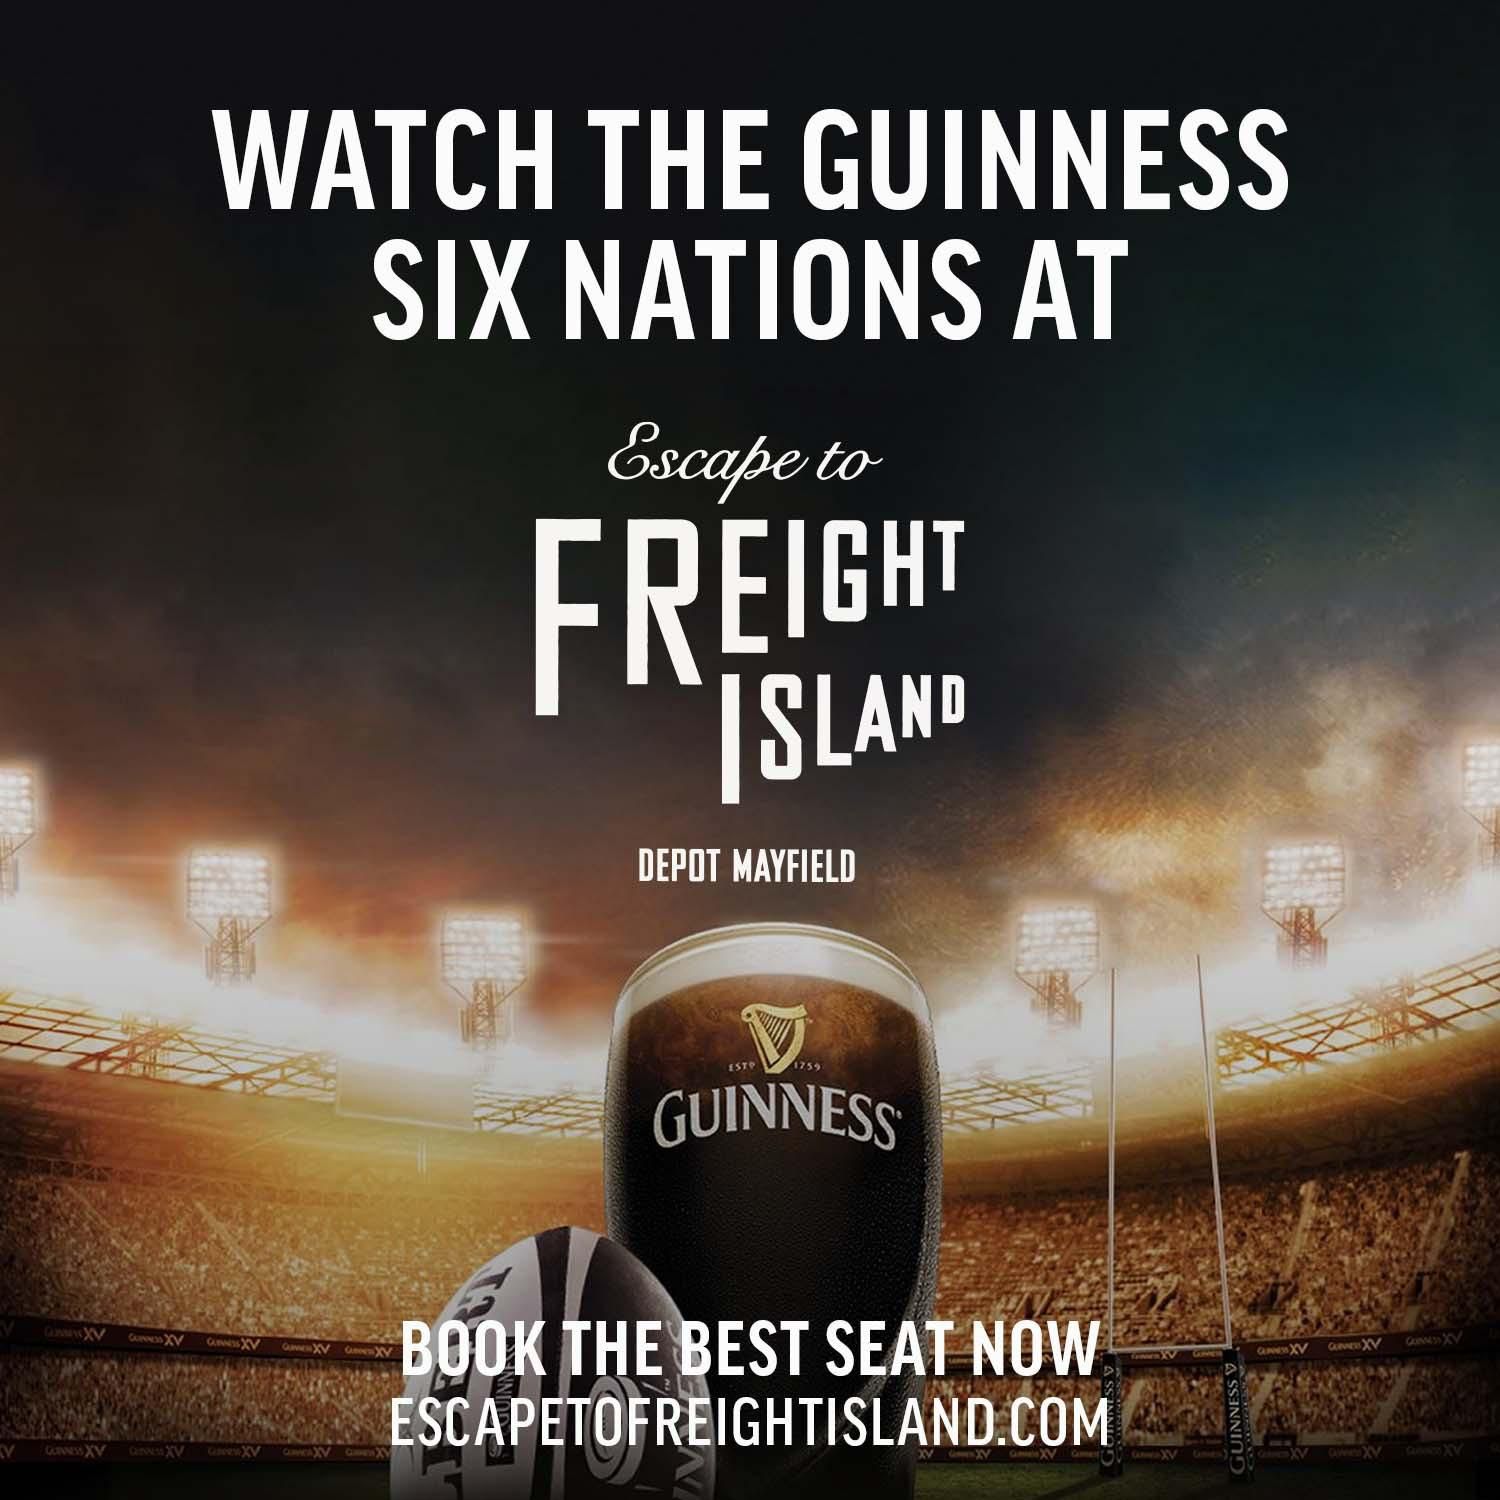 Escape to Freight Island is giving away free pints of Guinness during the Six Nations, The Manc